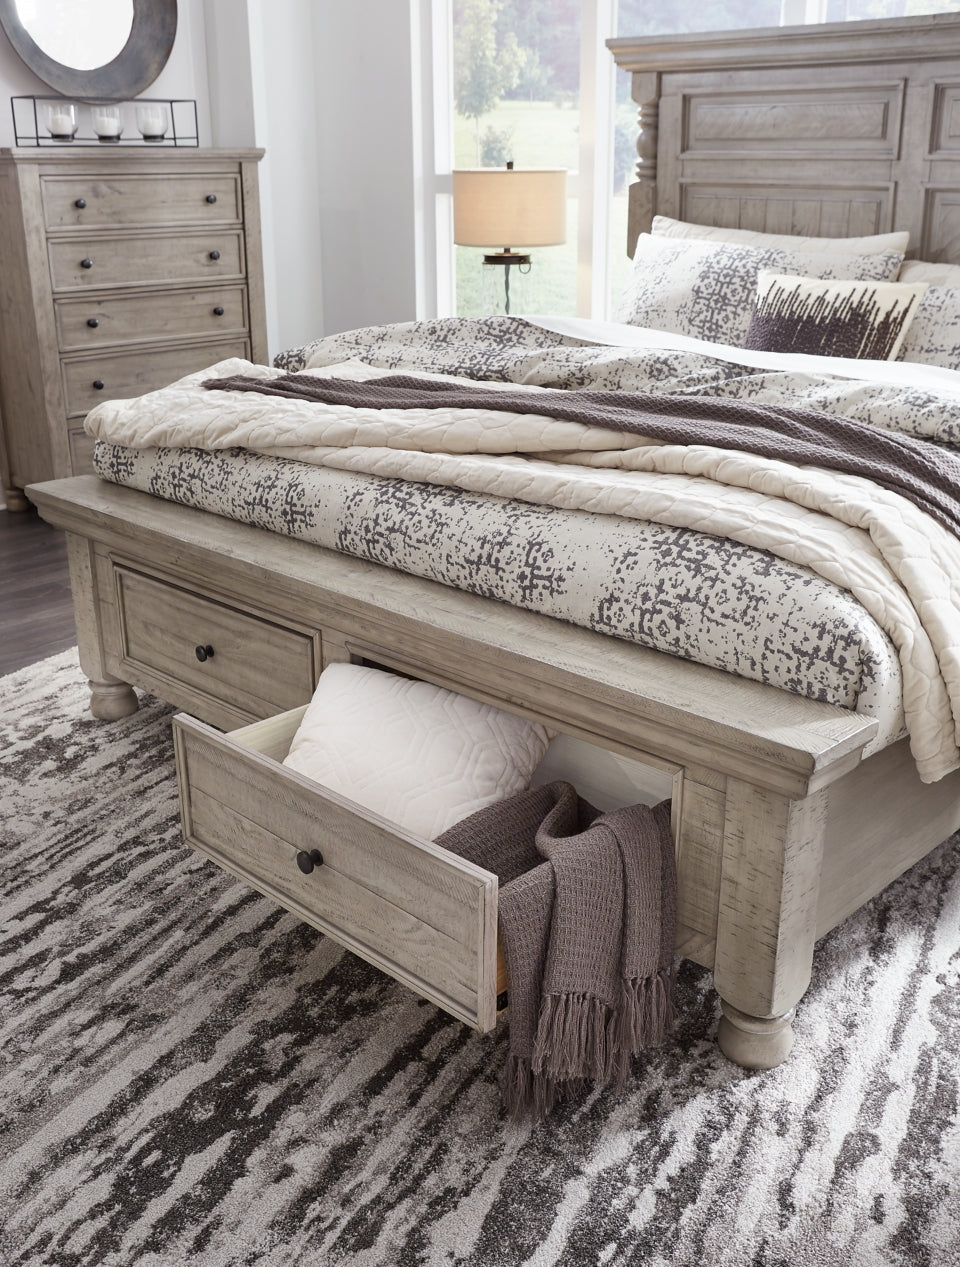 Harrastone Queen Panel Bed - furniture place usa